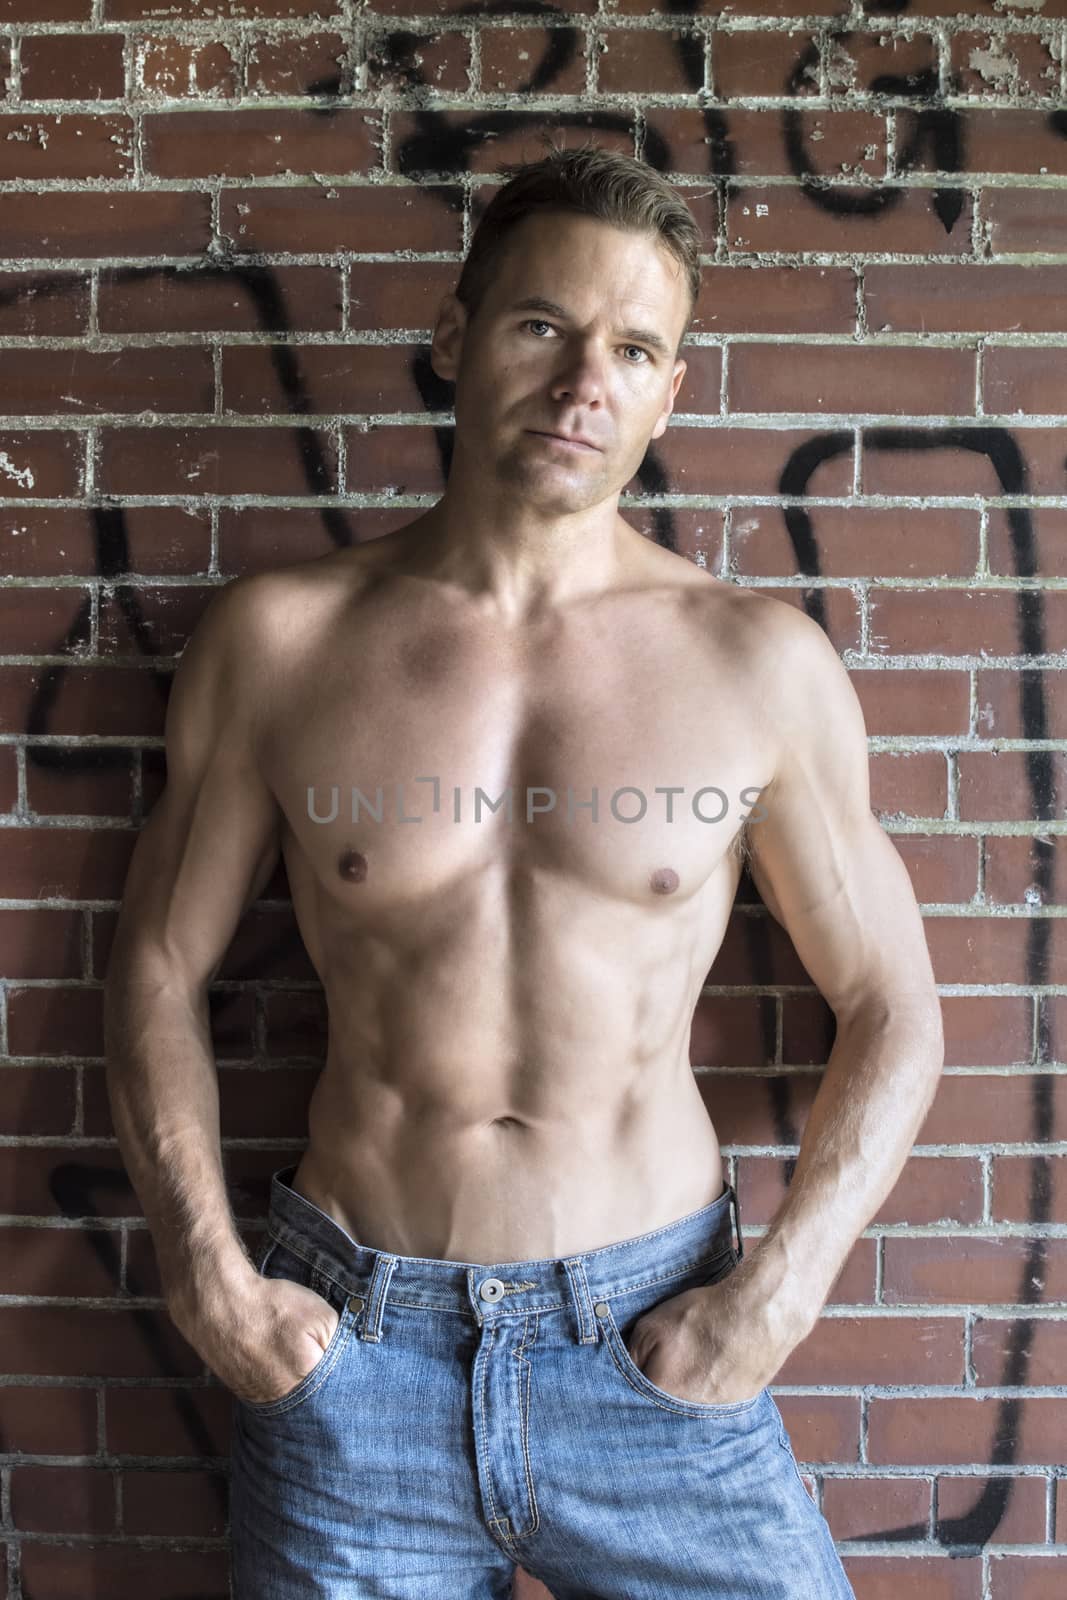 Muscular shirtless Caucasian man in blue jeans standing against brick wall with graffiti in urban setting